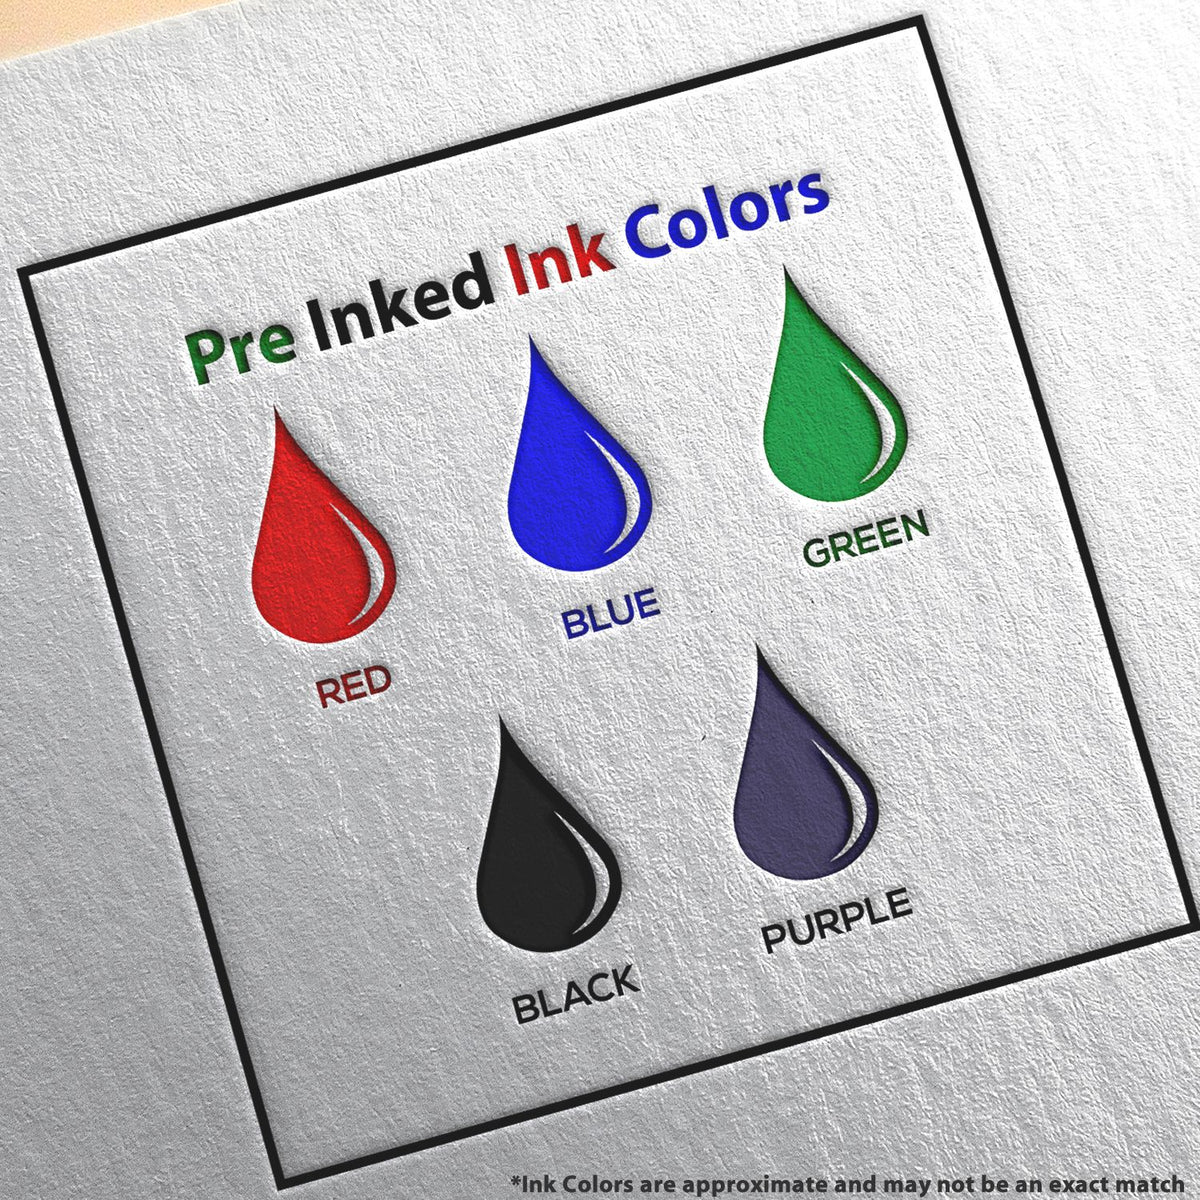 A picture showing the different ink colors or hues available for the Slim Pre-Inked Georgia Land Surveyor Seal Stamp product.